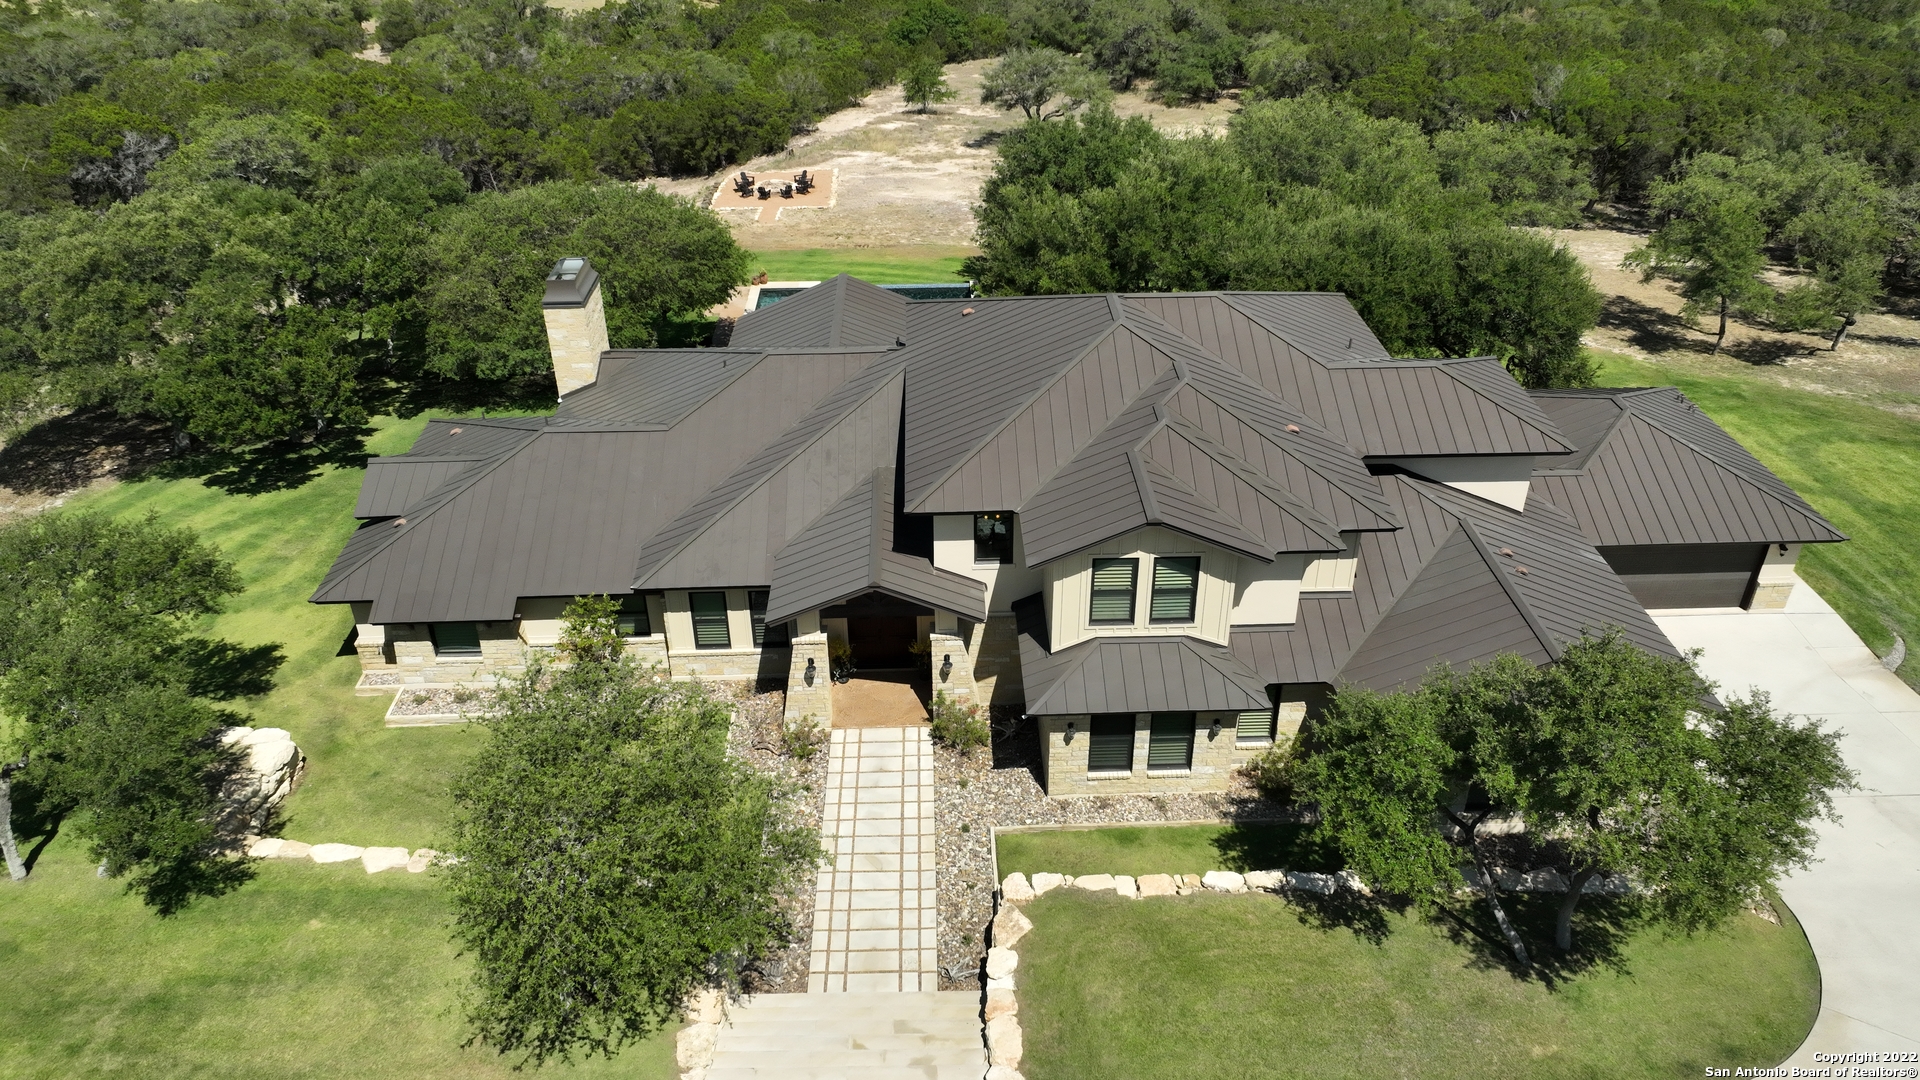 Better Than New!  Sensational Hill Country Masterpiece on 15 +/- acres.   Upon first step into the foyer, the soaring ceiling, brilliant architectural design, and gorgeous hardwood flooring create an instant WOW factor. Two Master Suites on first level! Recent rehab with all new exterior & interior paint, new carpet. 5 Total Bedrooms, 5 Full Baths, 1 Half-Bath, 4 Car Garage.  Patio opens from owner's suite moving along to the main covered patio with vaulted ceiling and wood beams continuing to a large Outdoor Kitchen. Serene faux edge pool with Spa overlooks acreage.  The open and inviting custom-designed floor plan includes a warm, welcoming interior which is awash with natural light and incorporates a separate dining room, two expansive living areas, flow-through living/dining area. The refined, timeless style is well-executed to complement, and not compete against the alluring outdoor elements, overlooking the surrounding valley.  Key features of this house include windows with plantation shutters, wide wood & iron staircase with storage underneath and beamed ceilings. Designed for gatherings and casual entertaining, this gourmet, eat-in kitchen  has been beautifully maintained and features commercial-grade appliances, electric and gas ovens, granite countertops, stone backsplash, stunning kitchen island, custom-made cabinets, decorative pendant lighting, large walk-in pantry, built-in microwave, gas range and wine fridge.  Spread out in the opulent downstairs owner's suite that comes complete with a luxury en suite bathroom, his-and-her walk-in closets and impressive valley views. A true oasis, the master bathroom is akin to a 5-star hotel and features a spa shower, deep Copper soaking tub, his-and-her vanities, marble countertops, and slate flooring.  Second master bedroom is a perfect mother-in-law suite complete with en suite, walk-in shower, walk-in closet, custom cabinets and slate floor.  Two of the three bedrooms upstairs feature phenomenal en suites each with stone and granite floors and vanities.  Three study areas, with soapstone work counters, are tucked strategically throughout both levels.  Wet Bar is set aside by the downstairs half-bath awaiting your pristine wine selection.    Adding to the home's charm are wood floors throughout the main living spaces. You will find System updates includes three upgraded HVAC systems, efficient furnace, smart security cameras, smart sound system, smart lighting system, smart locks and garage-door openers, Wi-Fi enabled thermostats, Energy Star appliances, built-in stainless Refrigerator/Freezer and high-efficiency kitchen appliances which makes it an ideal turn-key solution. Perched on the cusp of the property lined with historic live oaks is the resort like backyard! 1/2 mile walking trail carved throughout the wooded acreage accessible from the back yard.  View the vast dry-creek bed enshrined in limestone walls.  Outdoor Kitchen boasts built-in barbecue, built-in cooler, cook top, pool and hot tub, beautifully manicured lawn, large grassy area for yard games, well-established trees and shady trees. Take advantage of the best suburban living around! Simply ideal for year-round entertaining. Ideally located in an incomparable Bexar County neighborhood. A short drive to mixed-use shopping and dining areas. You have all the amenities you would like a short distance from home. Appreciate the benefits of a spacious 4-car attached garage. Plenty of room to park and enjoy top-rated Comal schools.  Be prepared for 'love at first sight'. Schedule your private tour today.